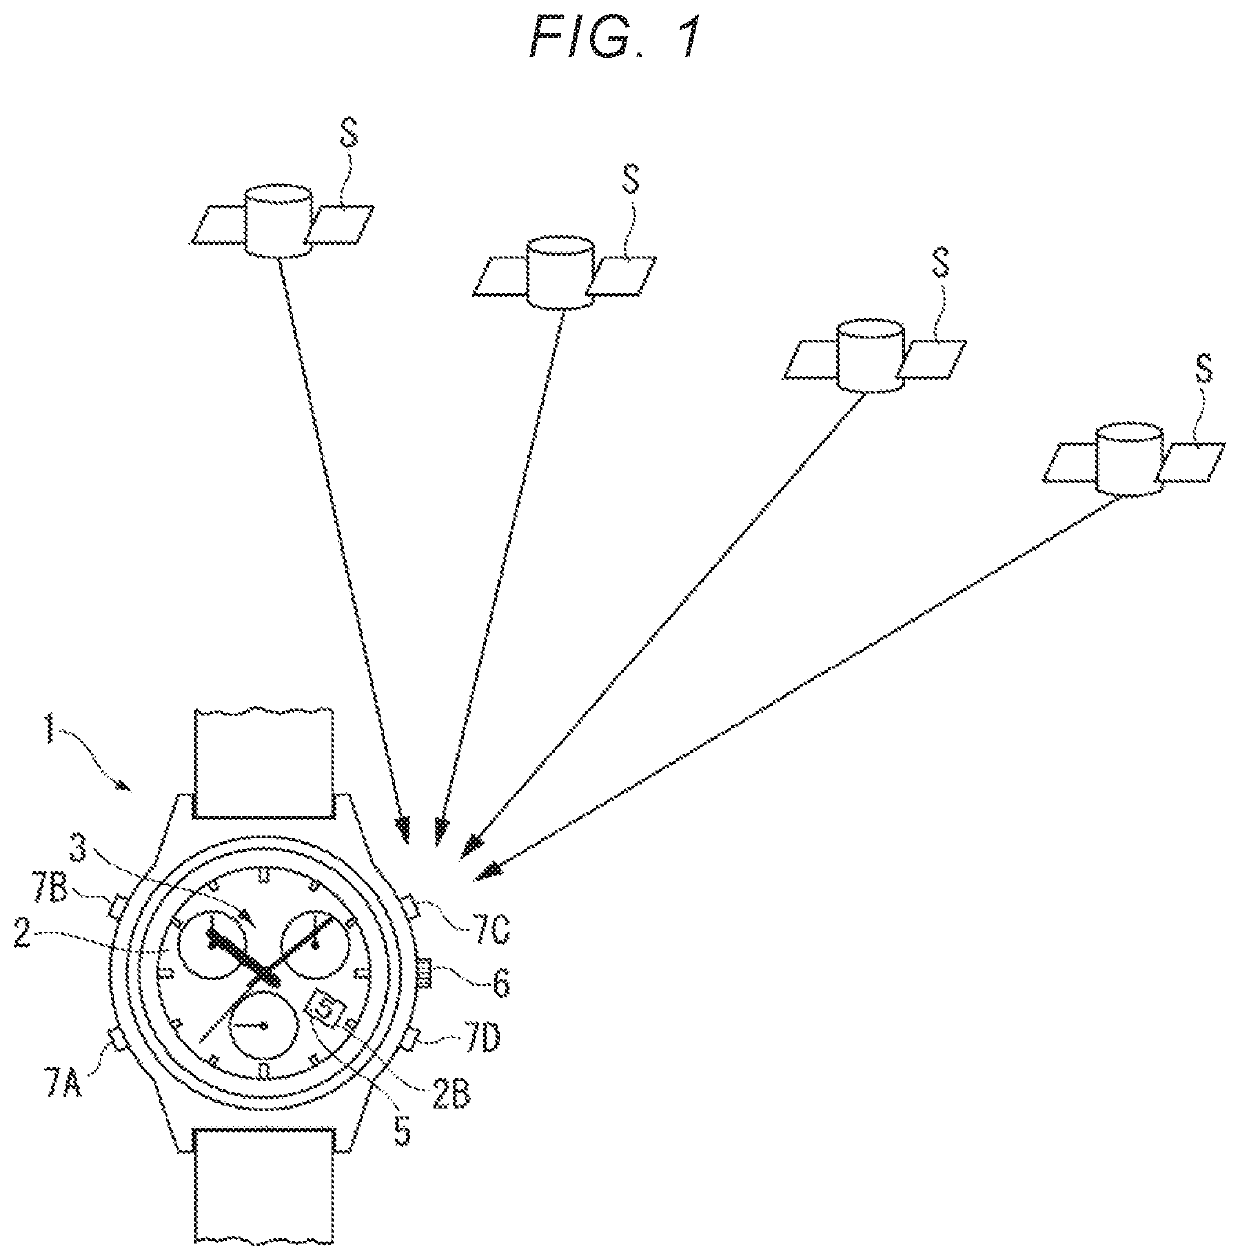 Electronic timepiece having a conductive member spaced apart from a planar antenna